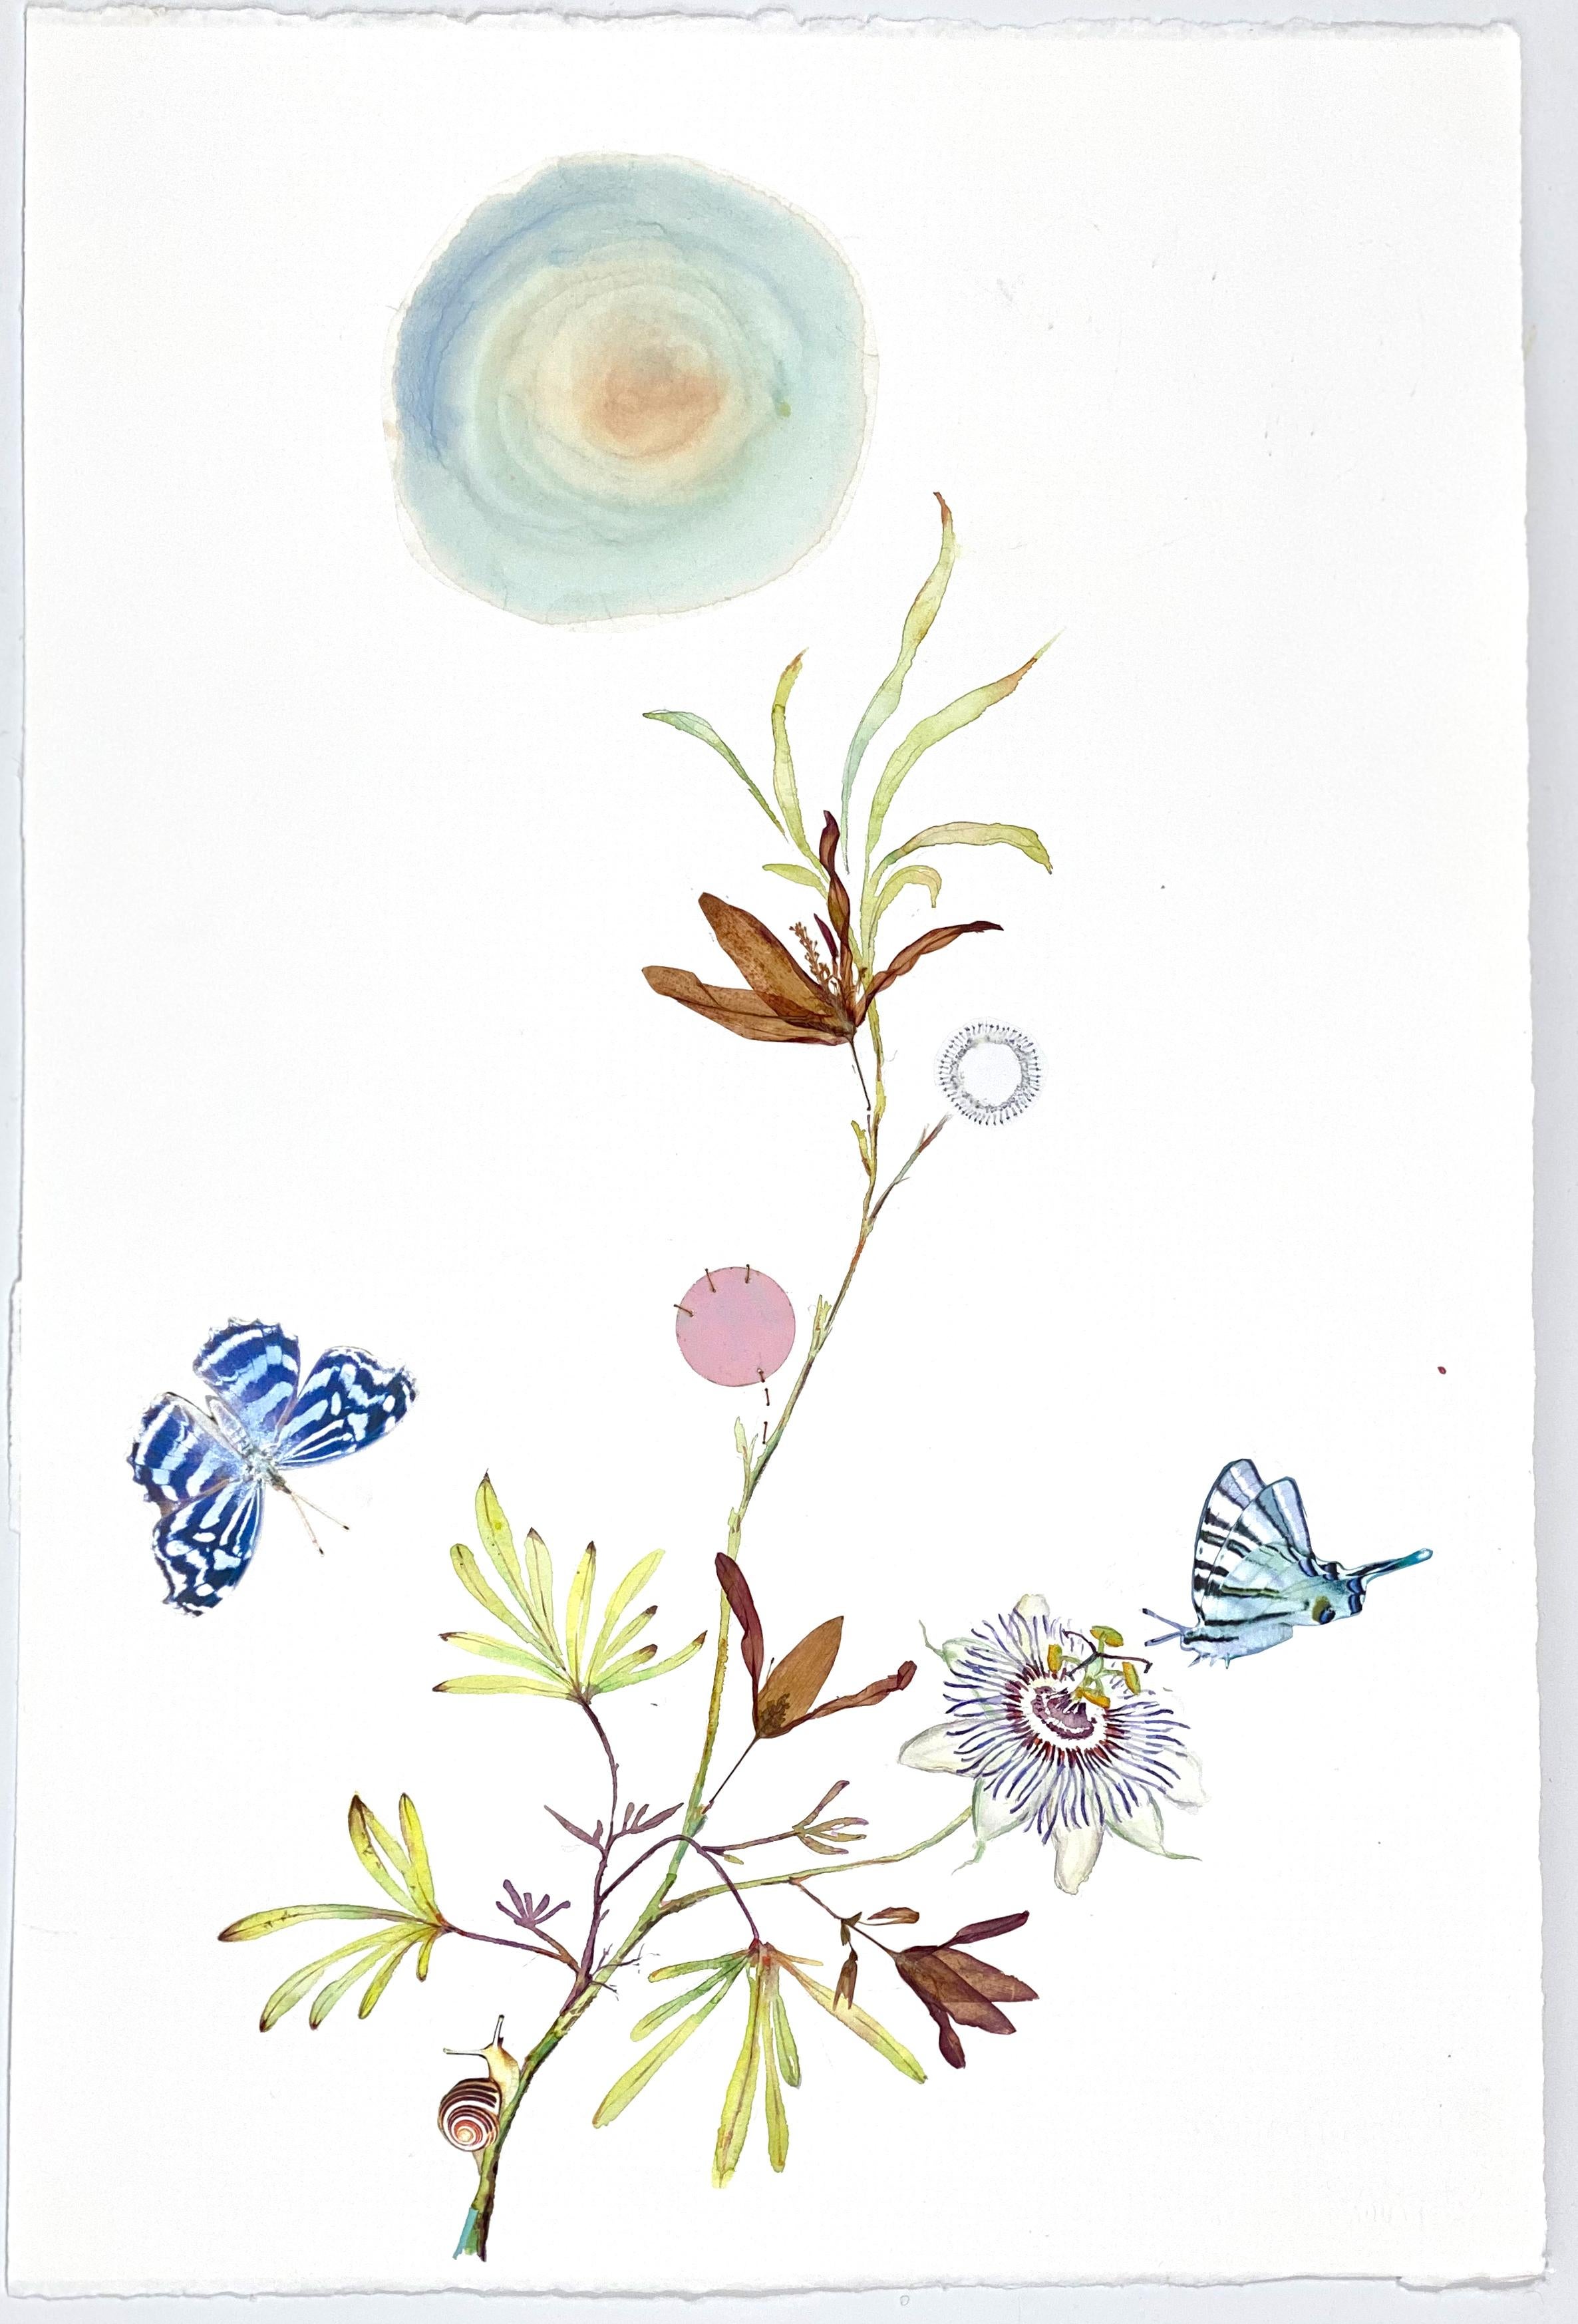 Marilla Palmer
Moonlight Flutters, 2021
watercolor, pressed flowers on Arches paper
22 x 15 in.
(pal201)

This original artwork by Marilla Palmer is a twist on the traditional Victorian botanical drawing, delicately painted with watercolor and